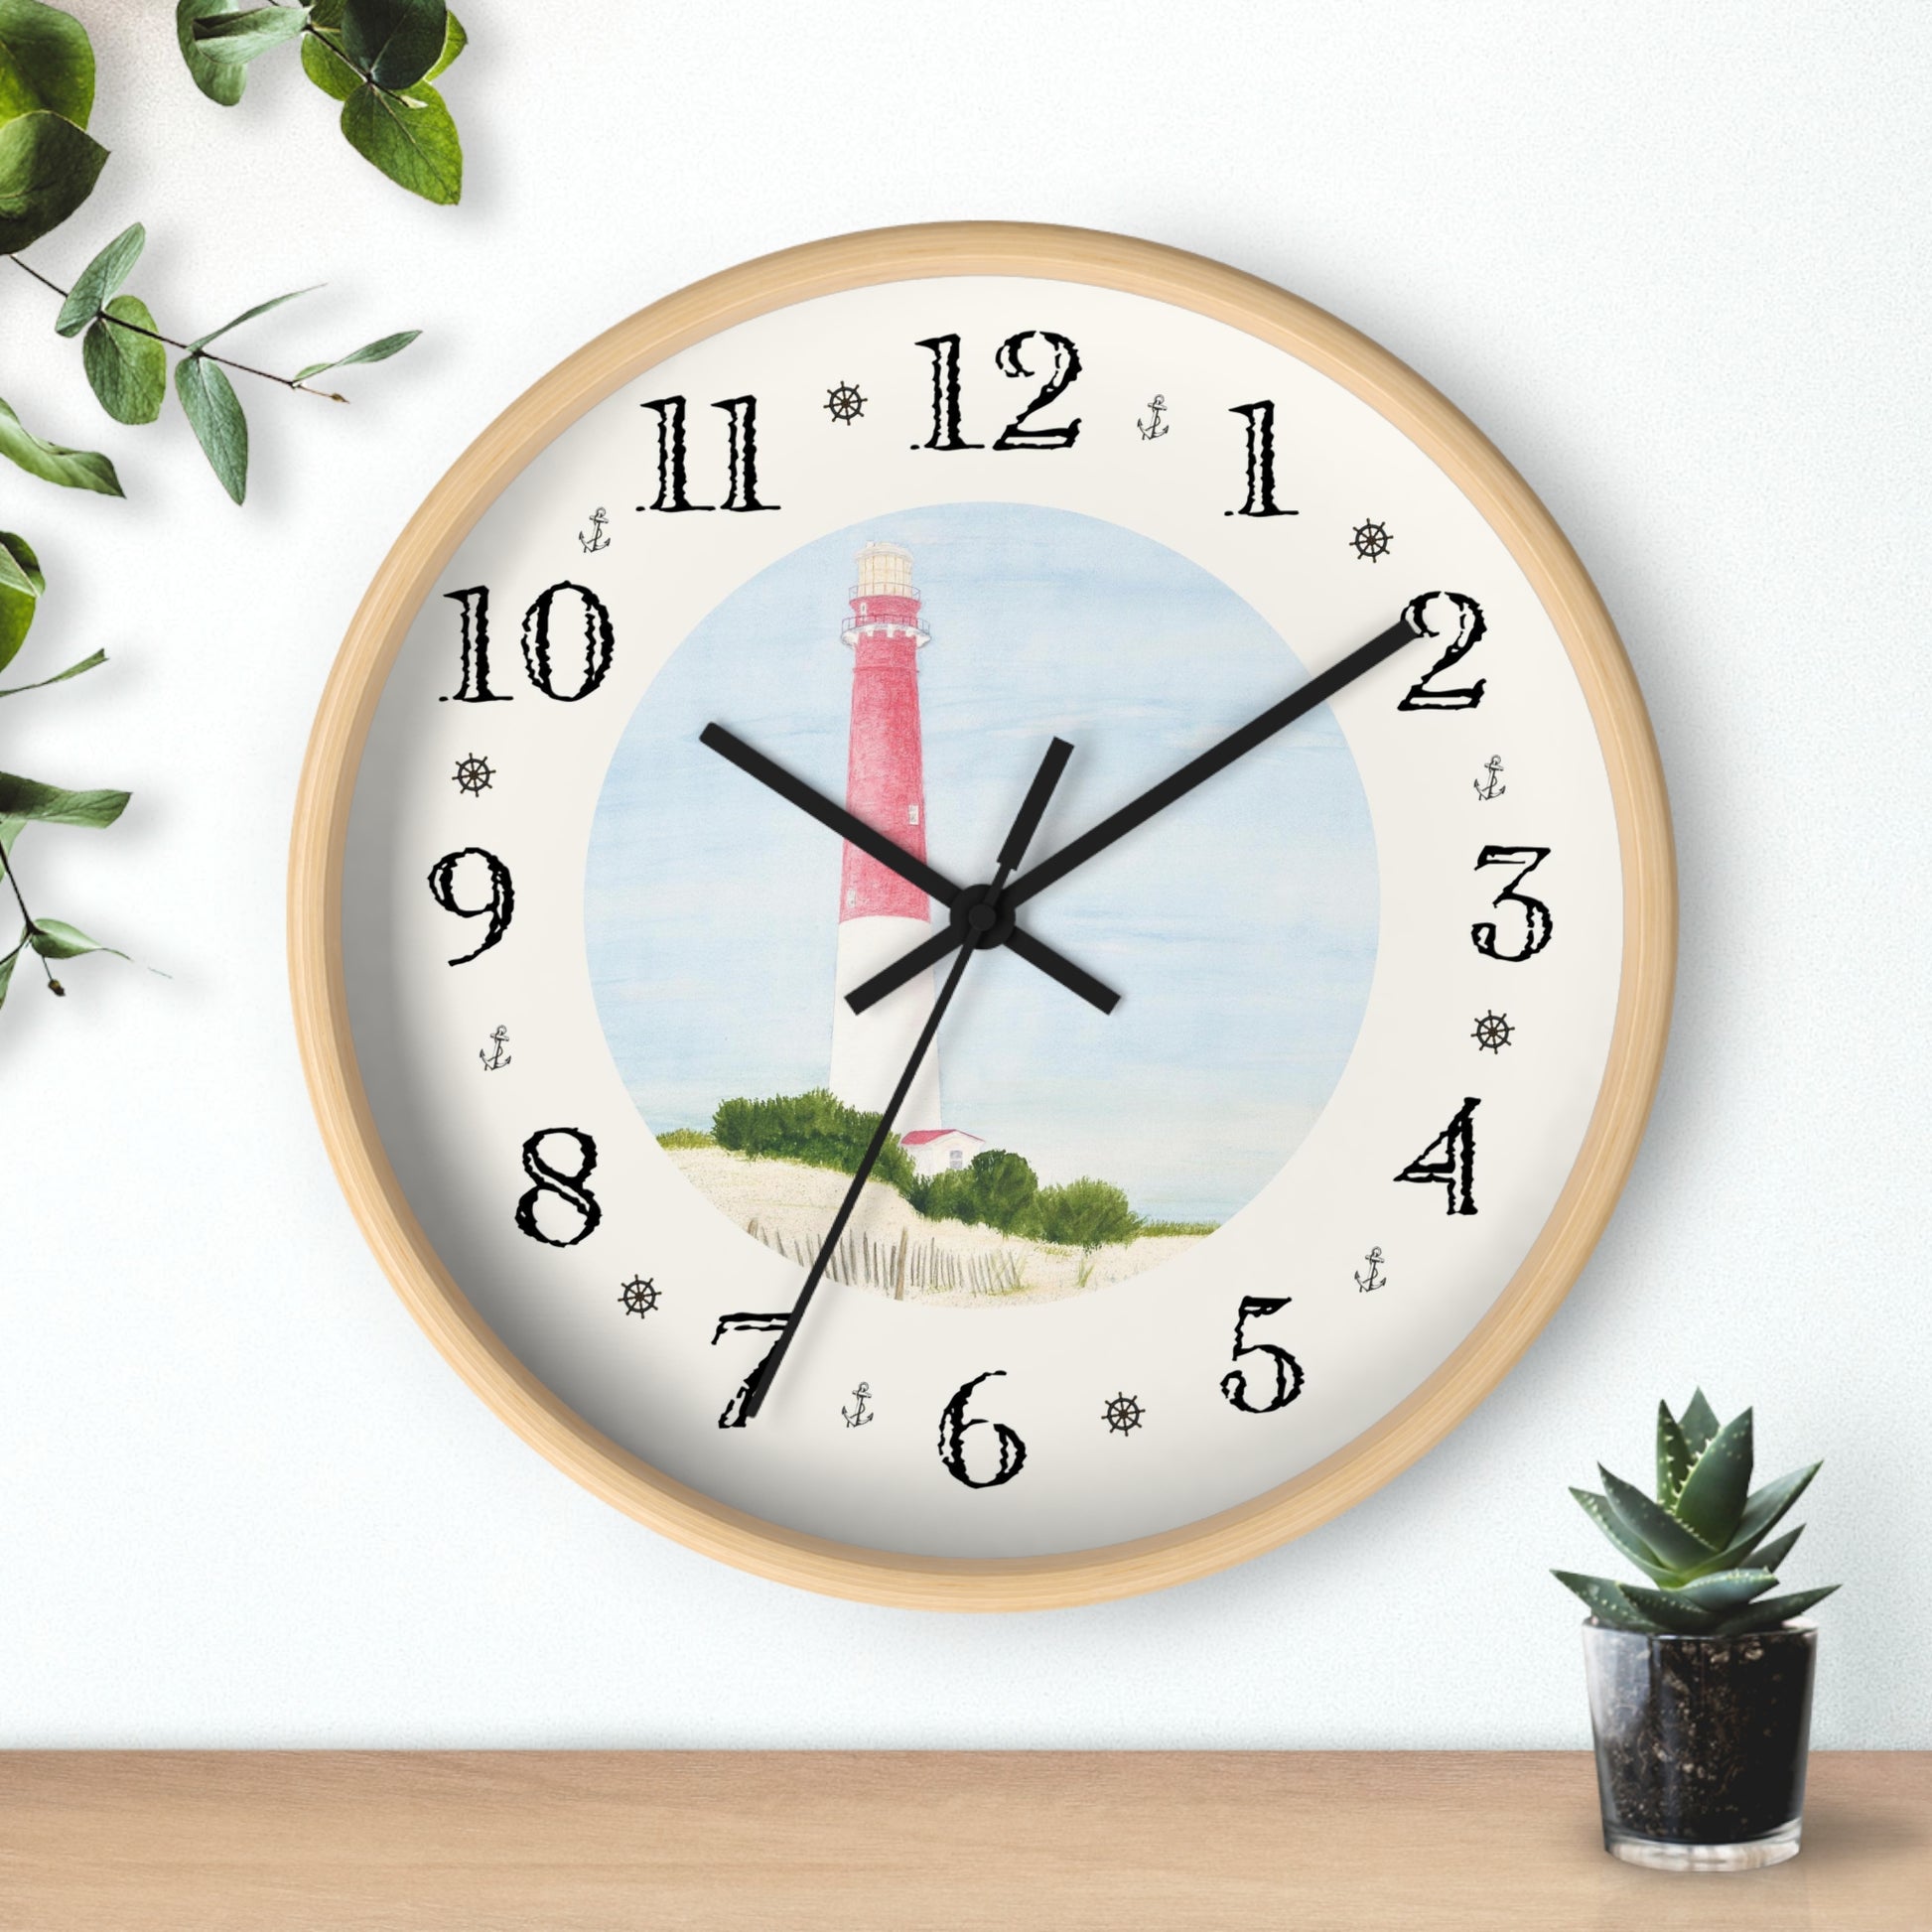 The Barnegat Lighthouse Heirloom Designer Clock will add a custom decorator touch to a favorite room.